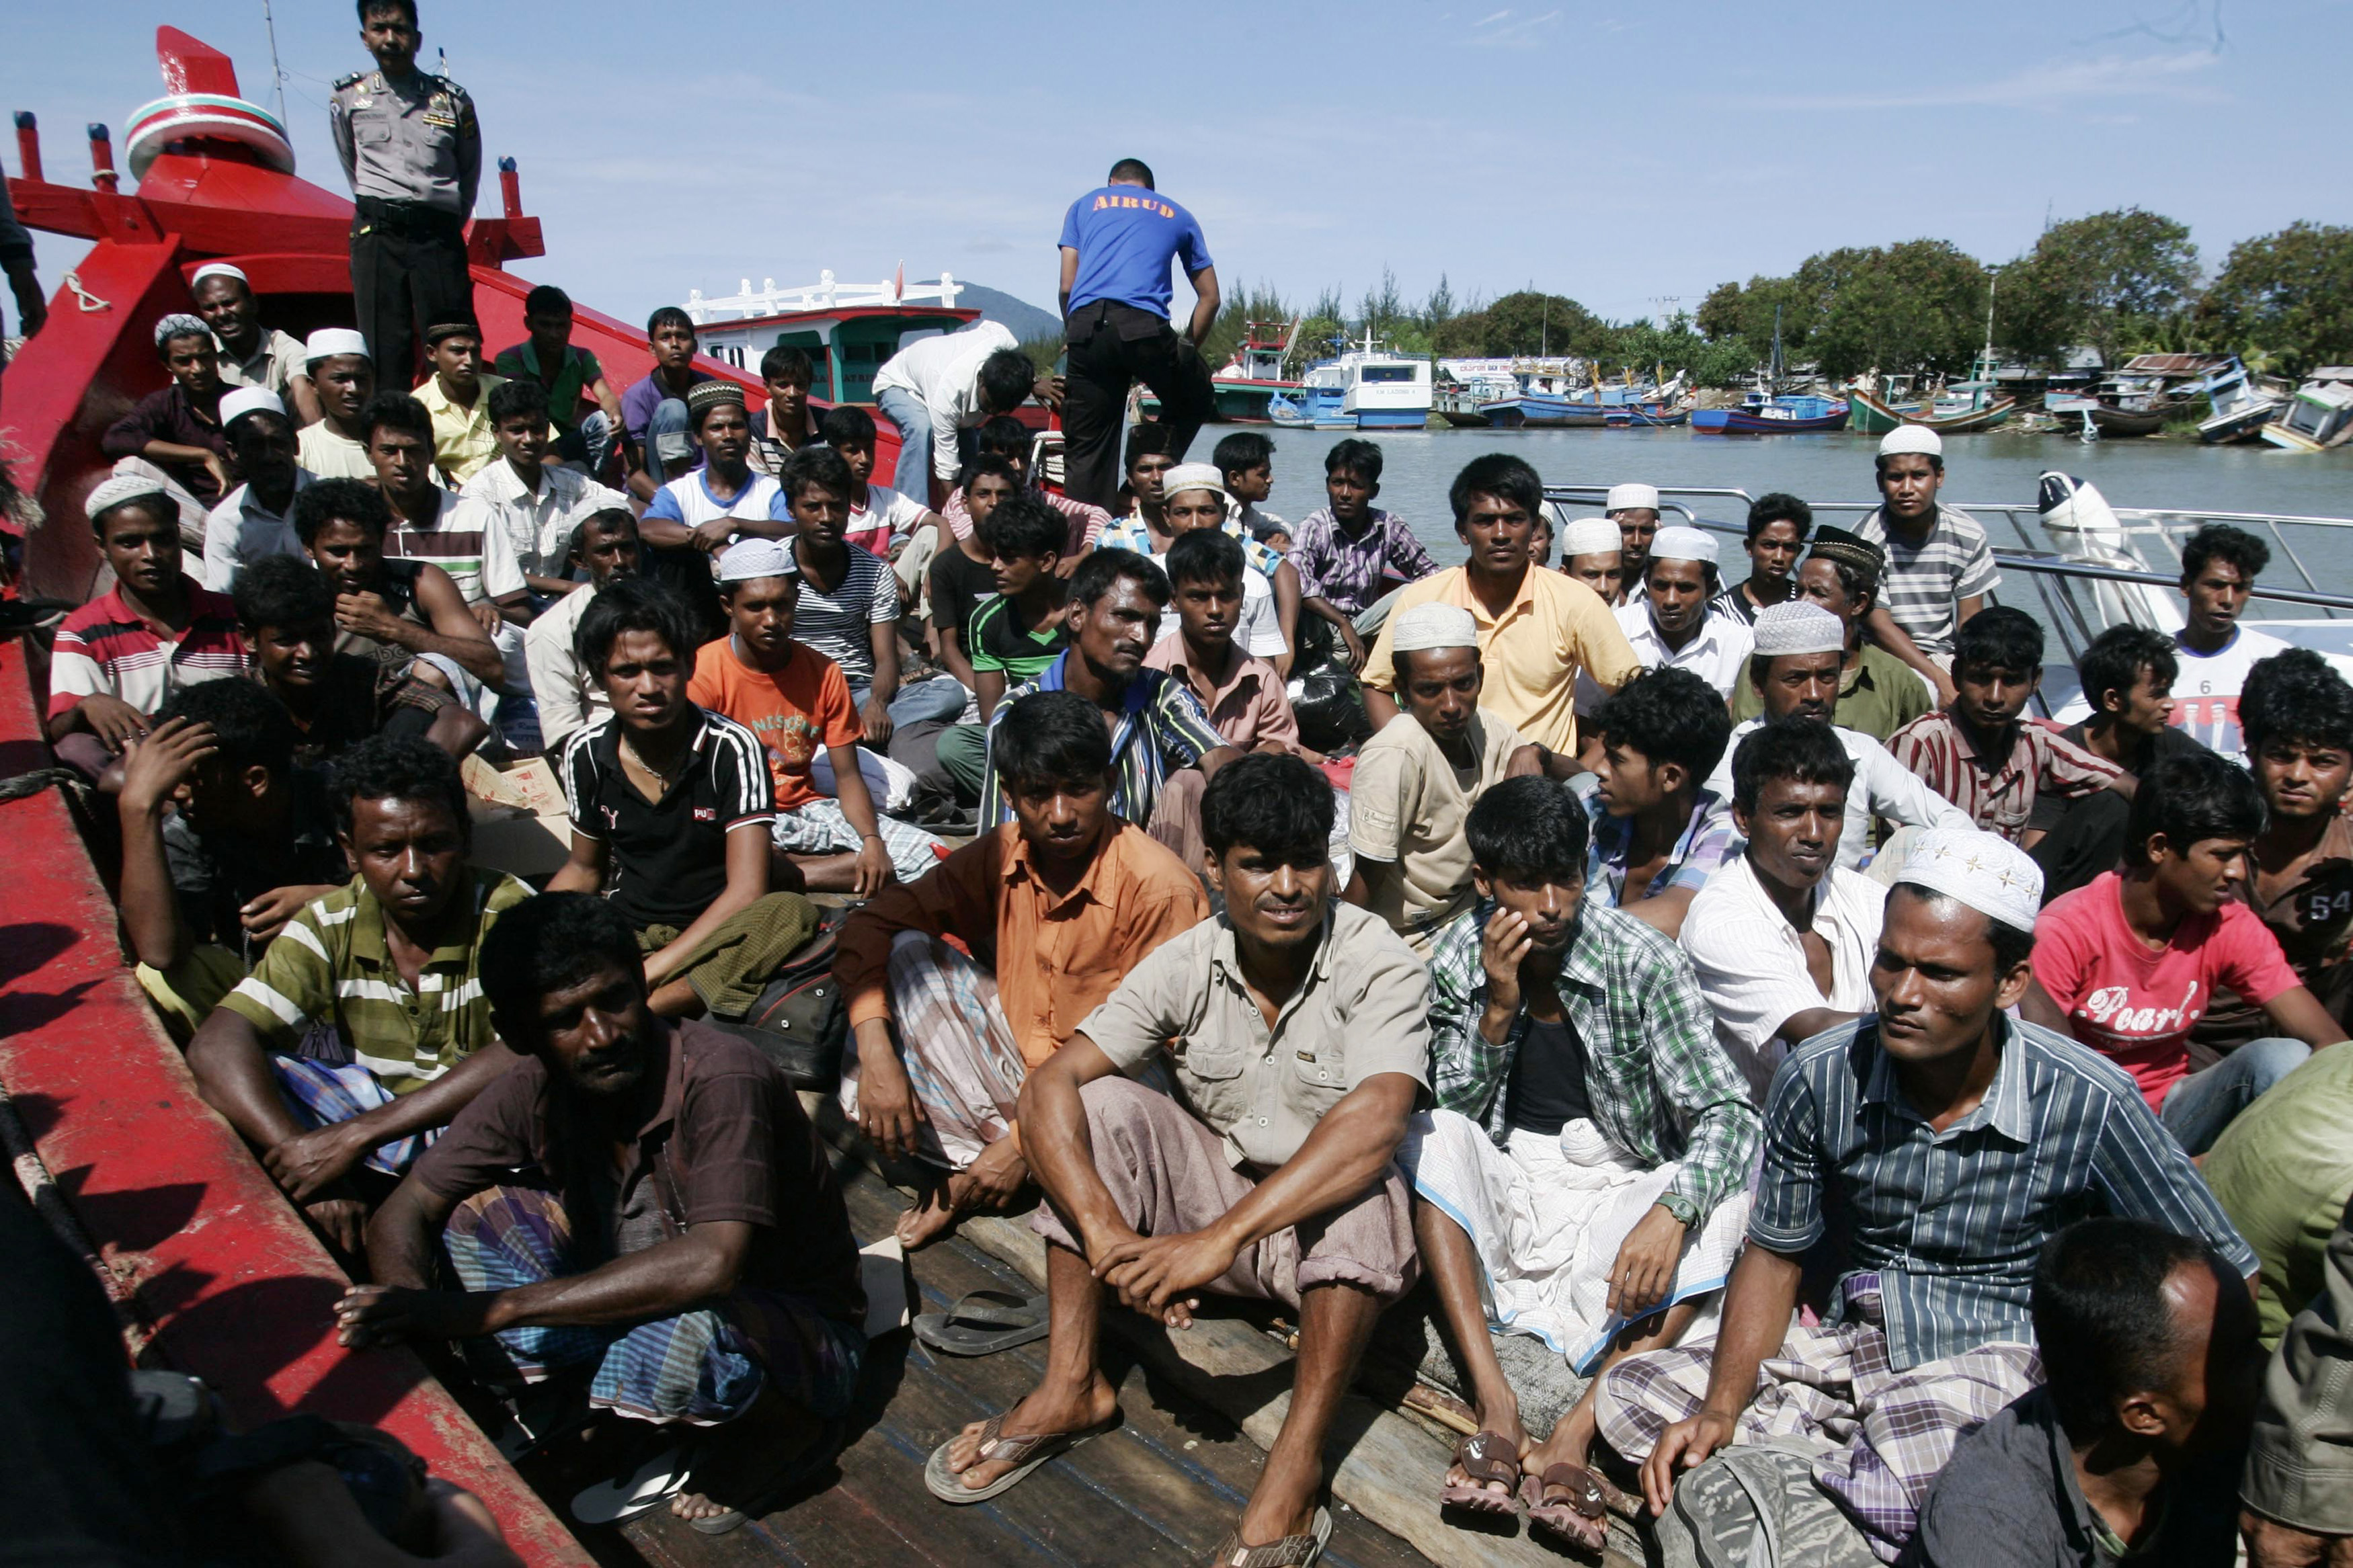 Ethnic Rohingya refugees from Burma sit on a wooden boat as they wait for transportation to a temporary shelter in Aceh Besar after arriving at Lampulo habour April 8, 2013. (Reuters)